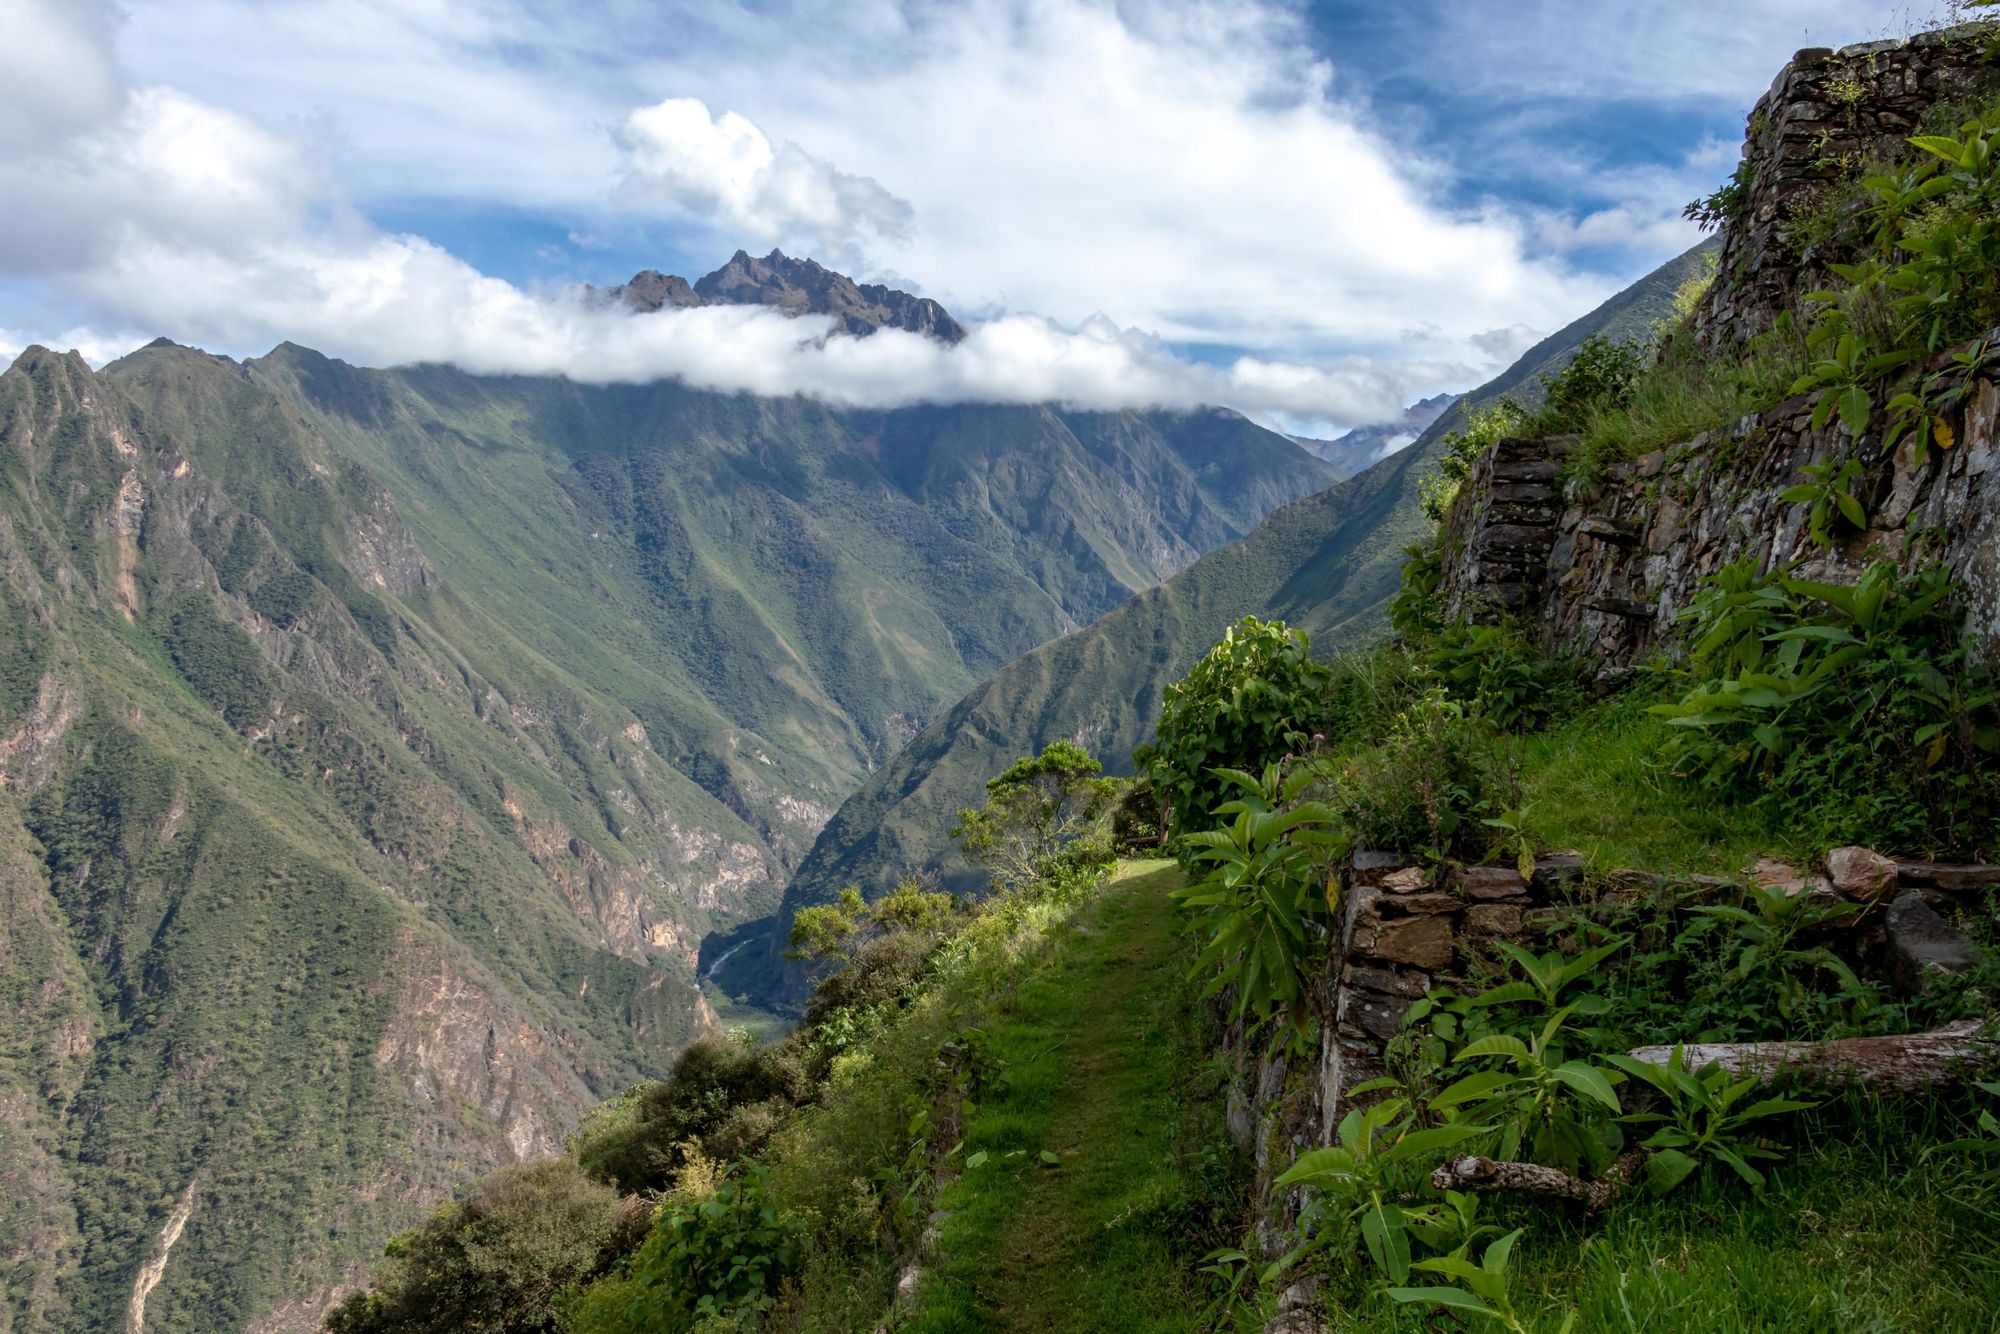 The view as seen from Pinchuyniyoc, between Choquequirao and Maizal. Photo: Getty